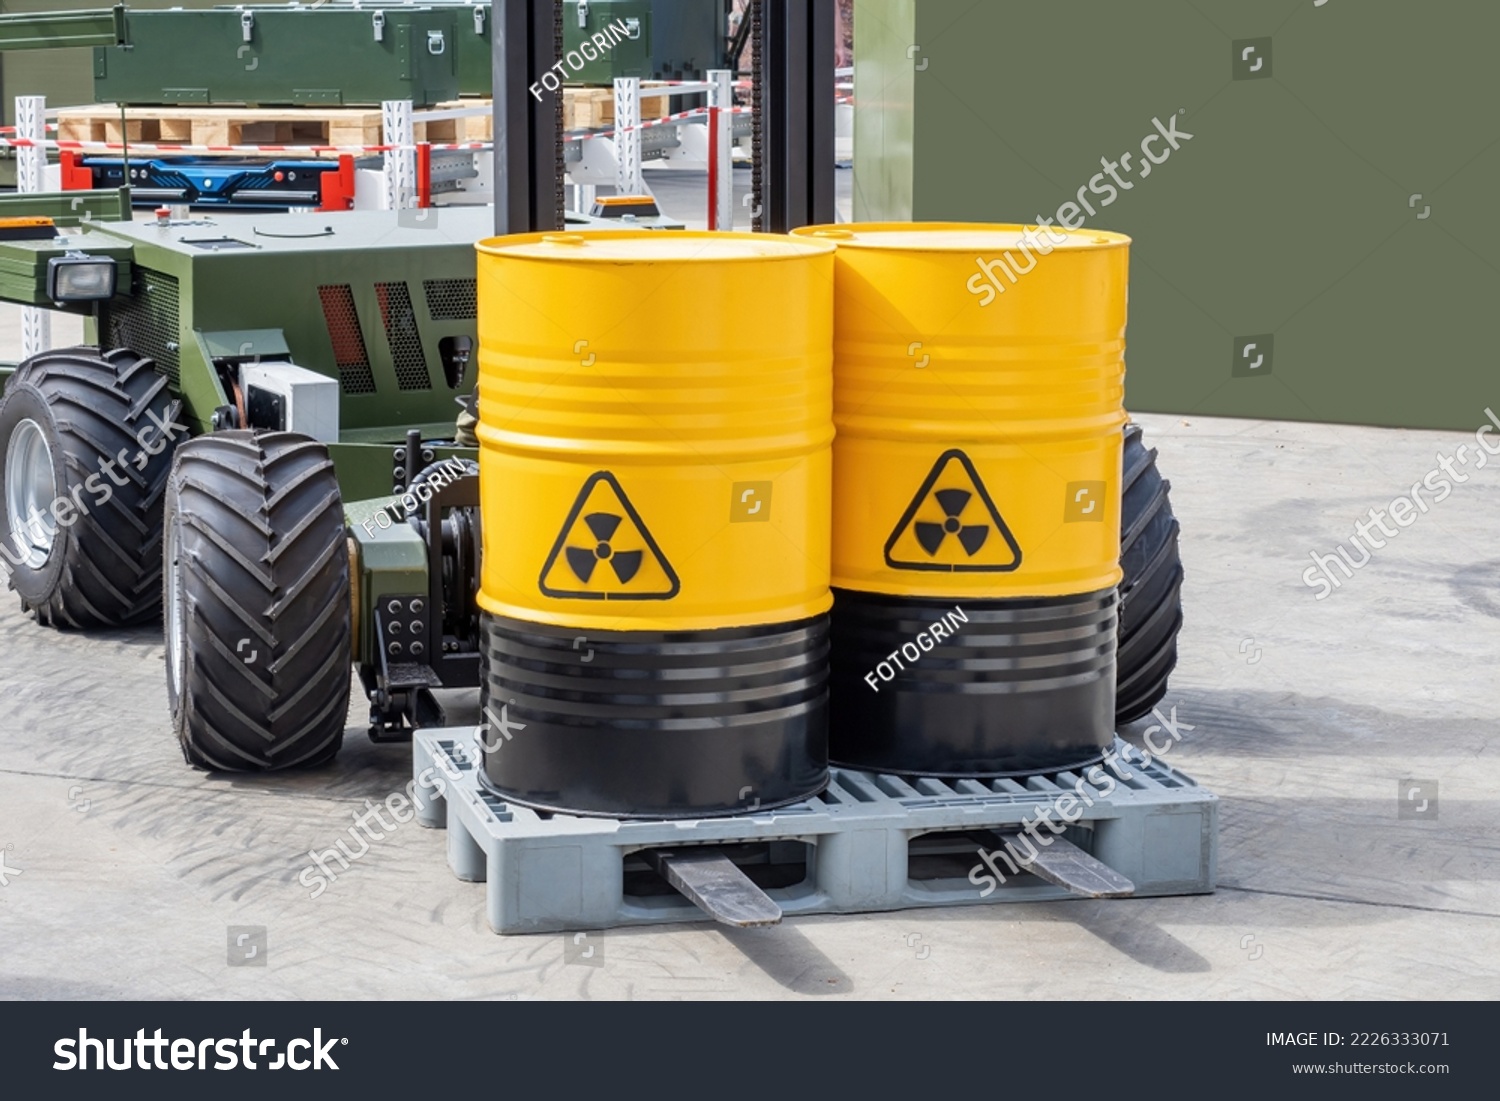 Barrels with radioactive products. Unmanned forklift. Machine for working in radioactive zone. Forklift for transportation of hazardous substances. Robot carries barrels of radioactive material #2226333071